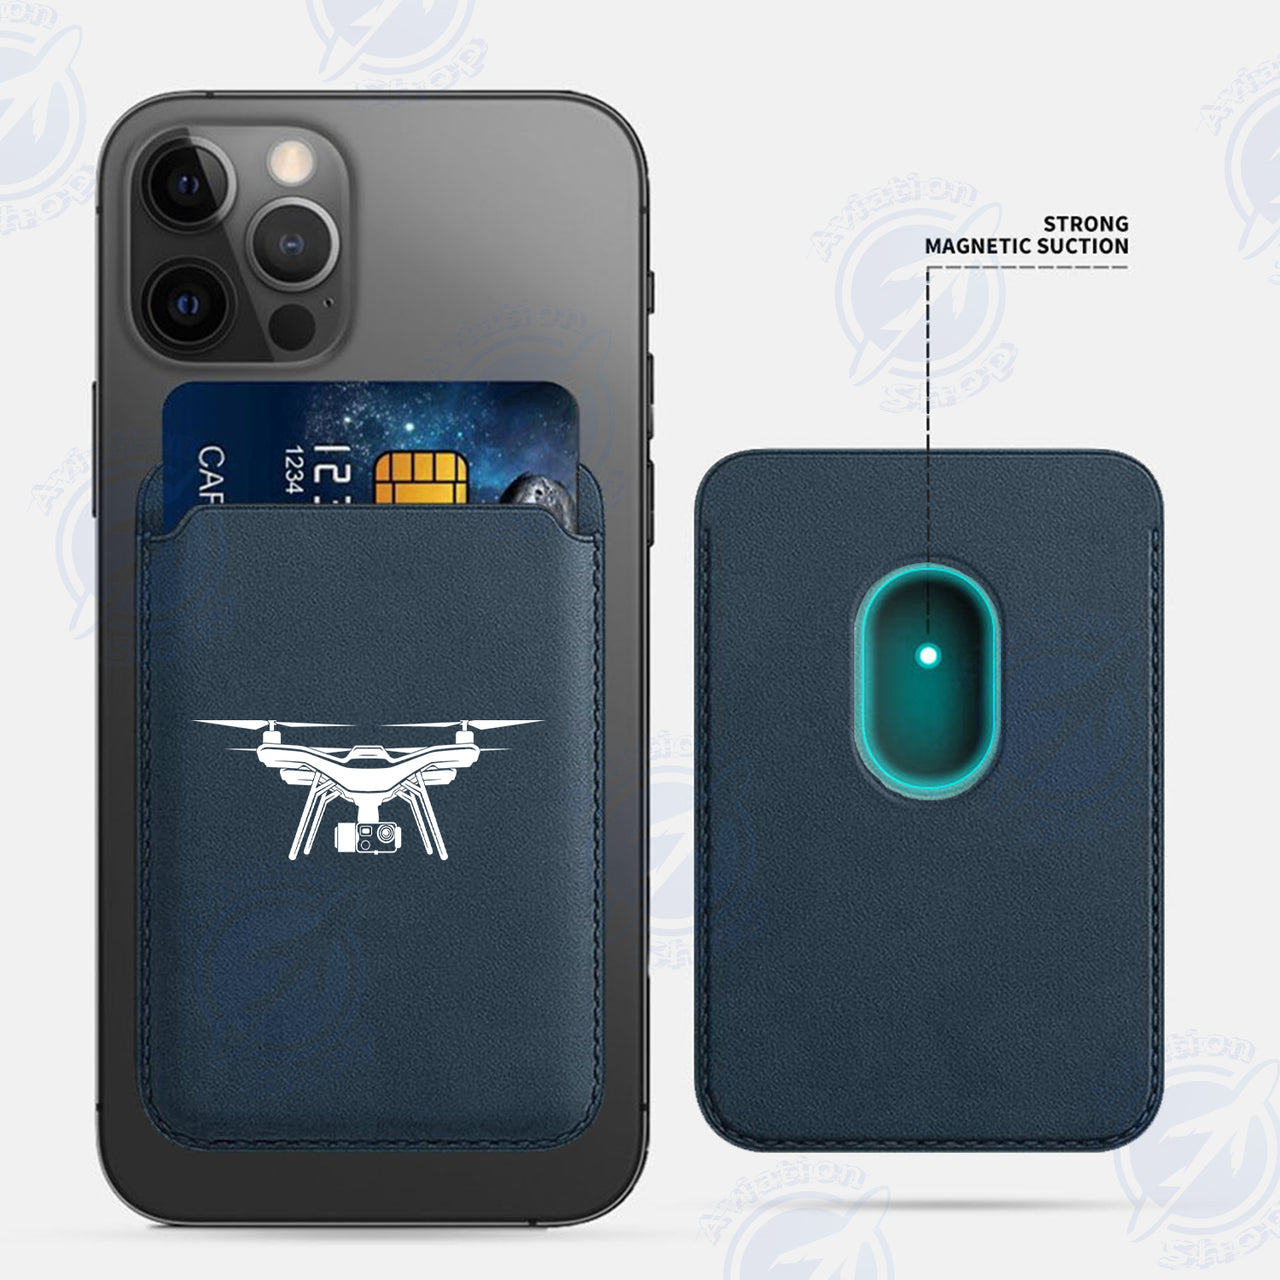 Drone Silhouette iPhone Cases Magnetic Card Wallet